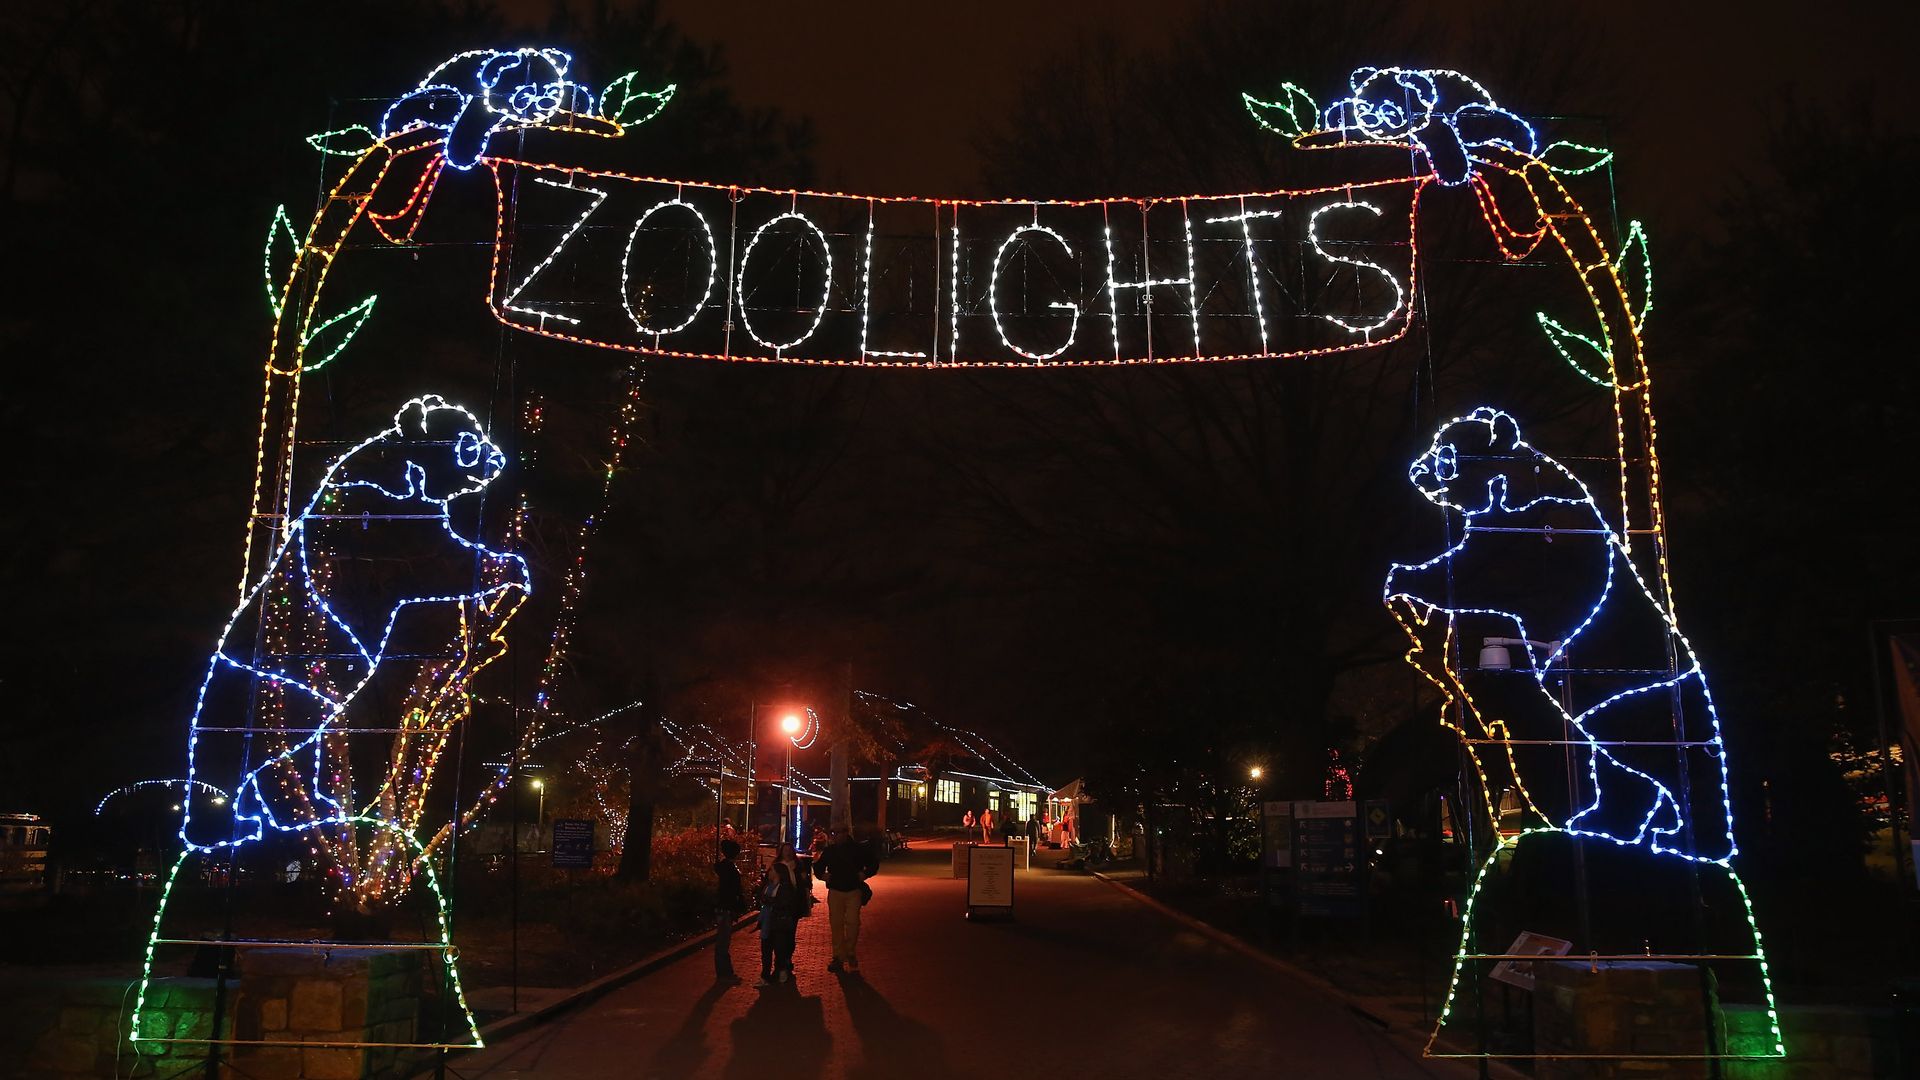 A Zoo Lights display from 2013.